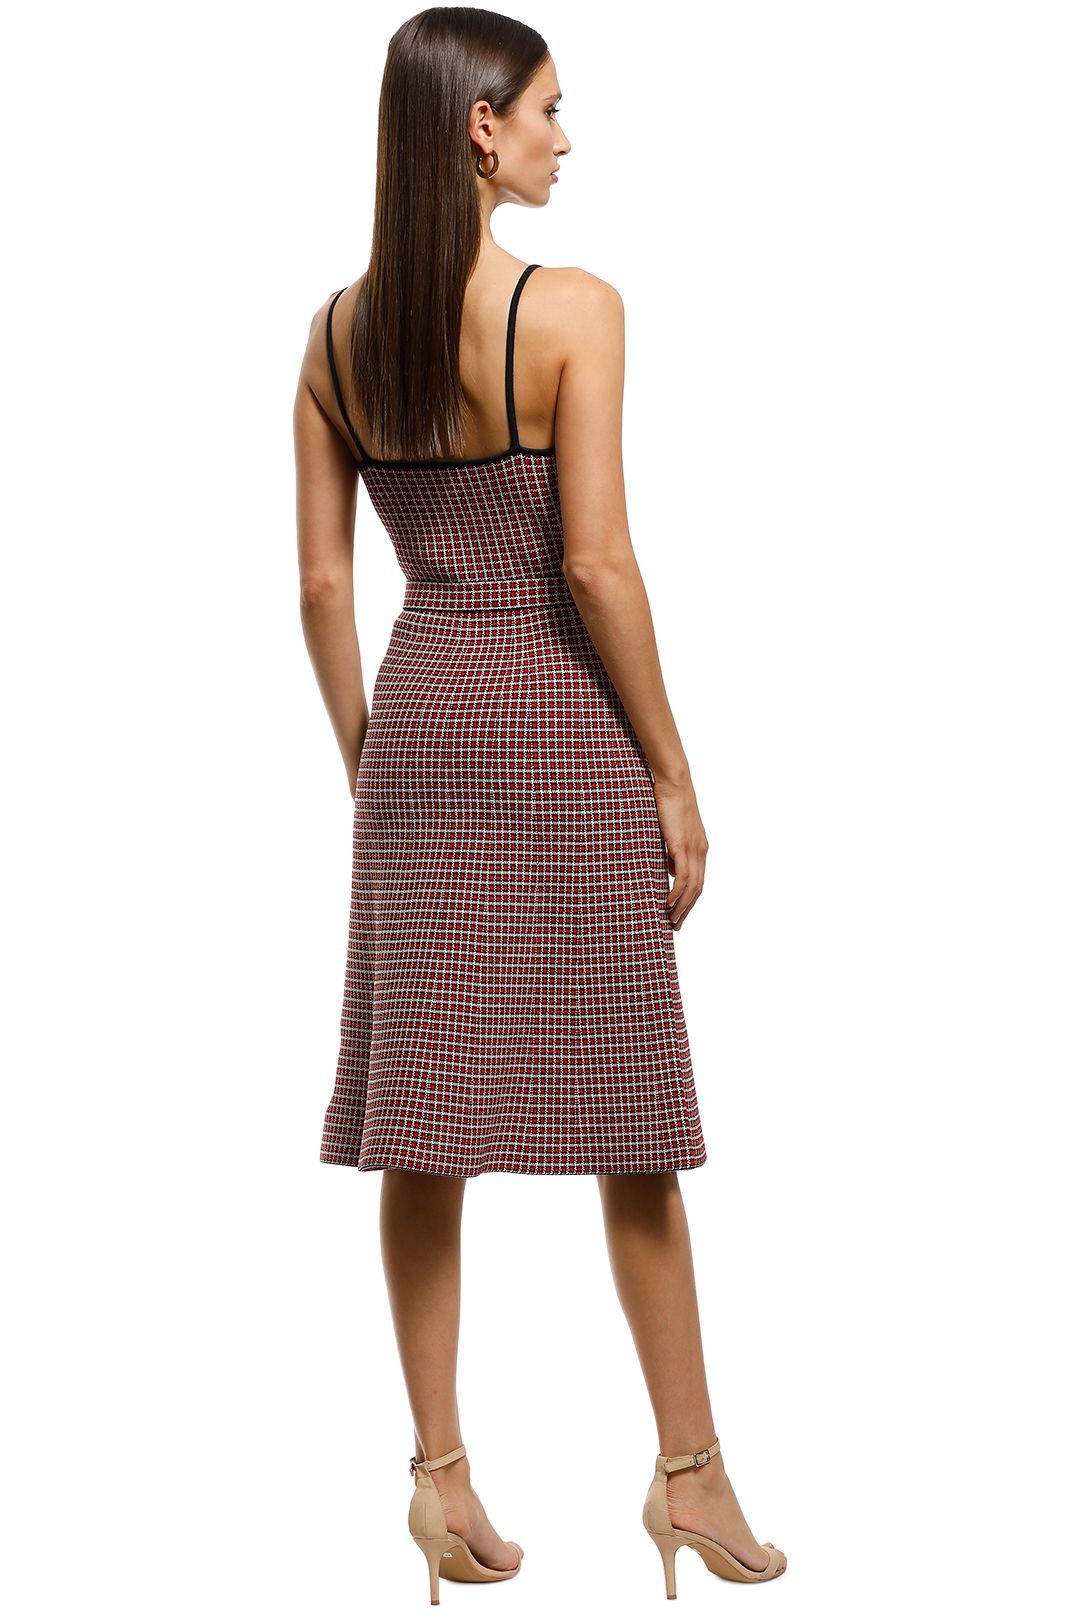 Scanlan Theodore - Crepe Knit Plaid Dress - Red - Back